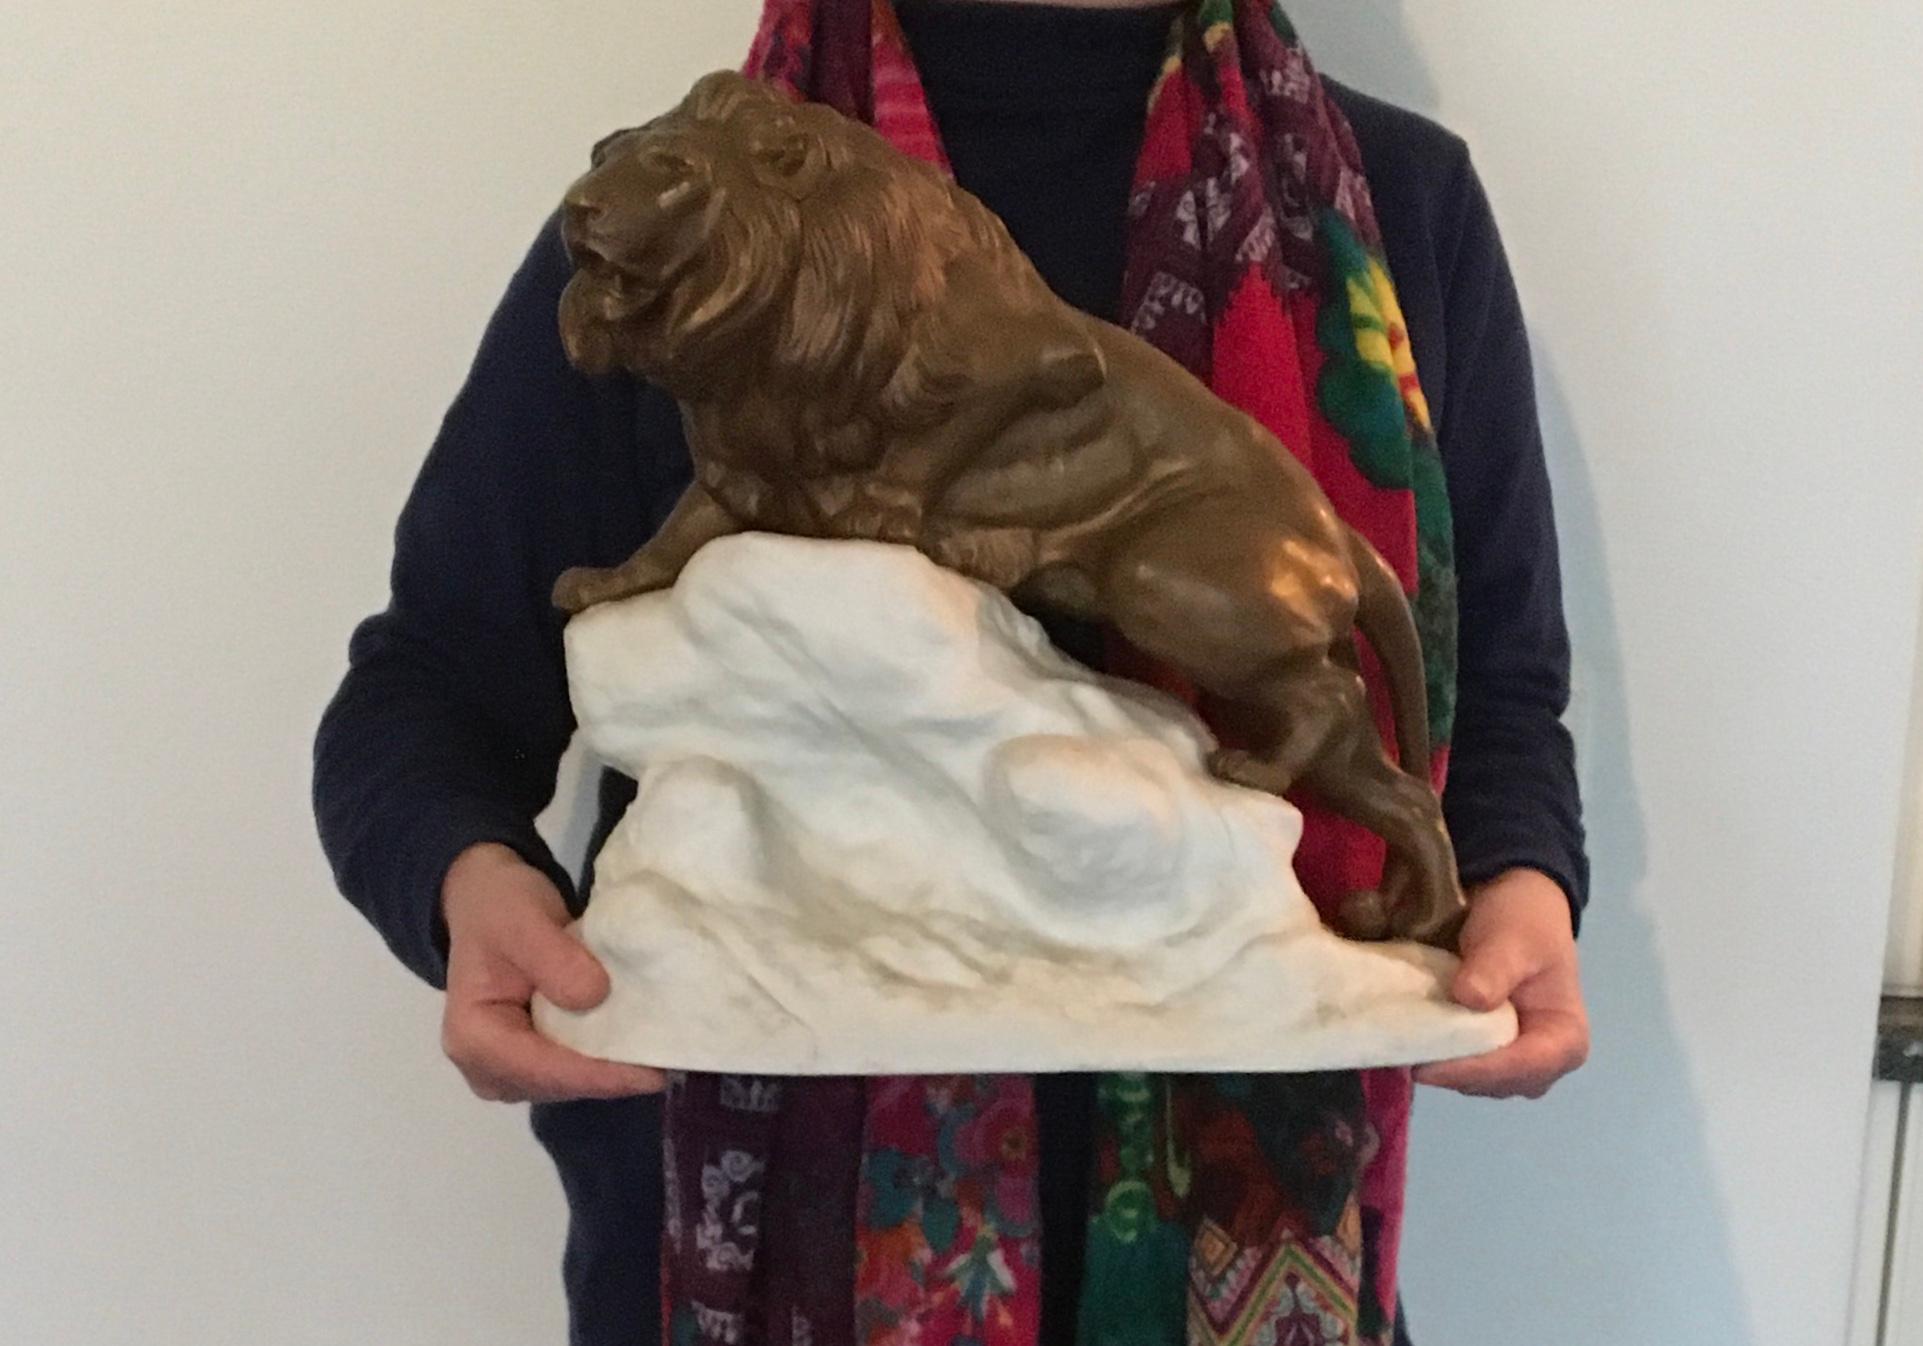 Bronze lion on a white rock - on top of the world like the Lion King. 
A stunning animal sculpture by Clovis Edmond Masson, a French artist known for animal sculptures ( 1838 - 1913 ) 
Very detailled gilt bronze lion animal on a white bisquit -